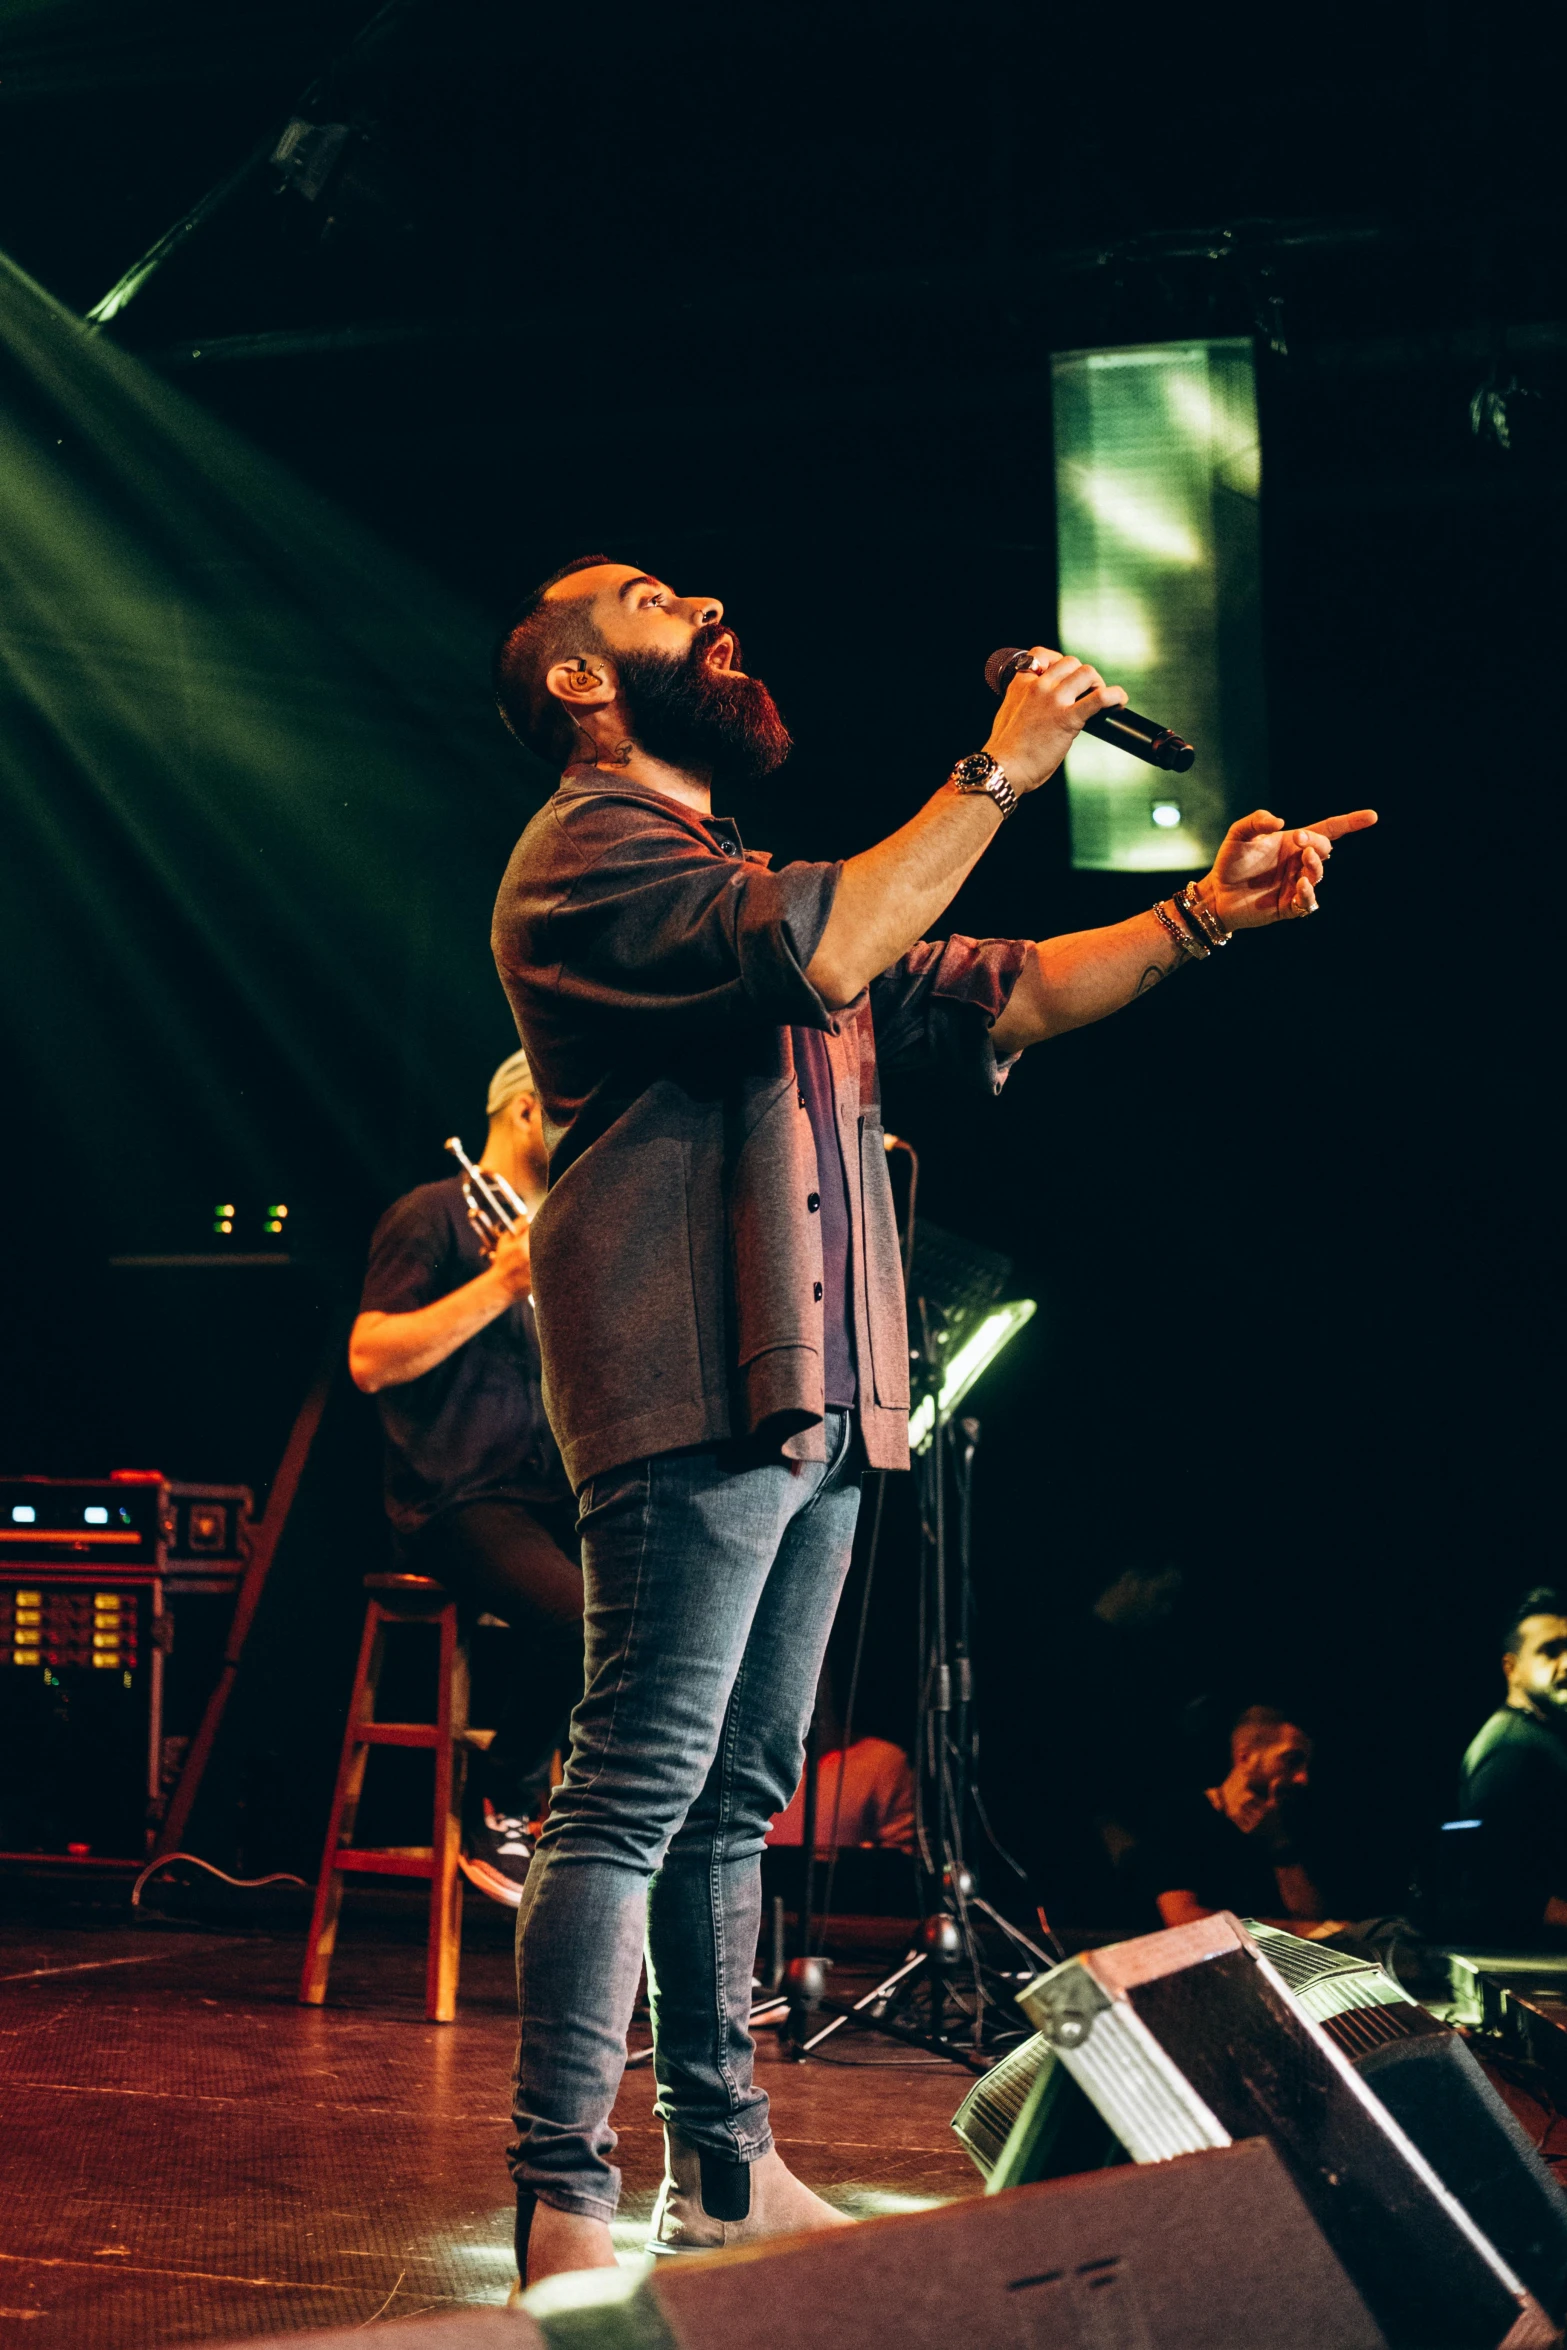 a bearded man singing into a microphone while performing